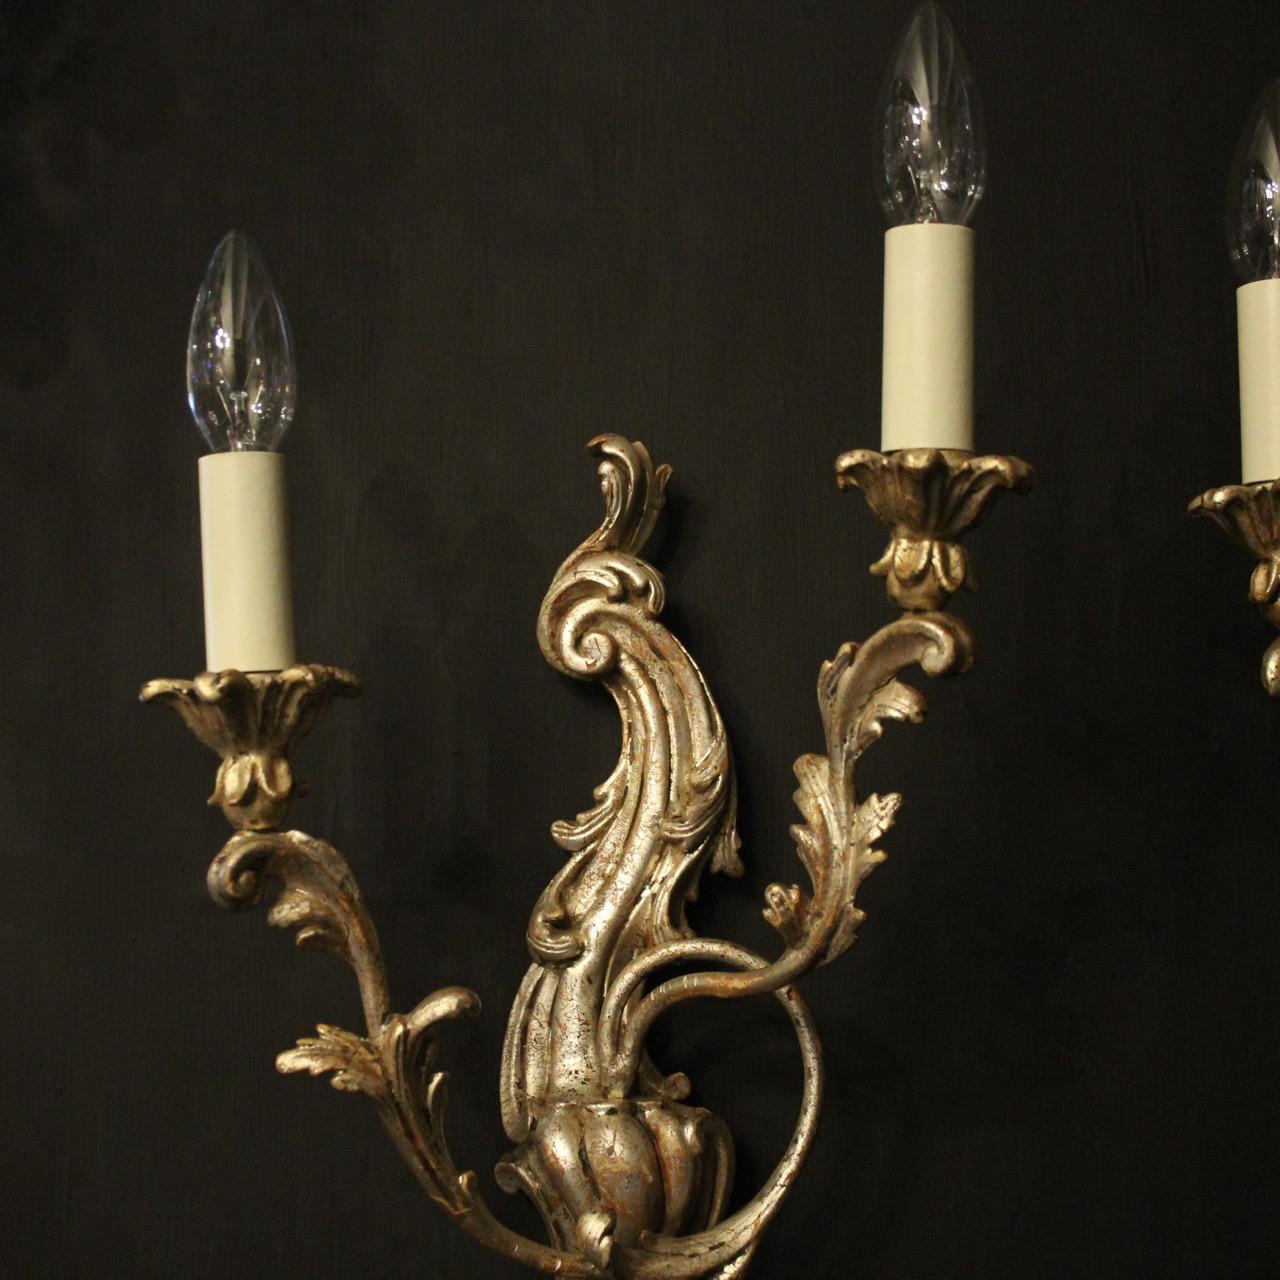 A decorative Italian carved silver giltwood and toleware twin arm antique opposing wall lights, the foliated toleware leaf scrolling arms with wooden leaf bobeche drip pans, issuing from an ornate opposing Acanthus leaf silvered wooden scrolling